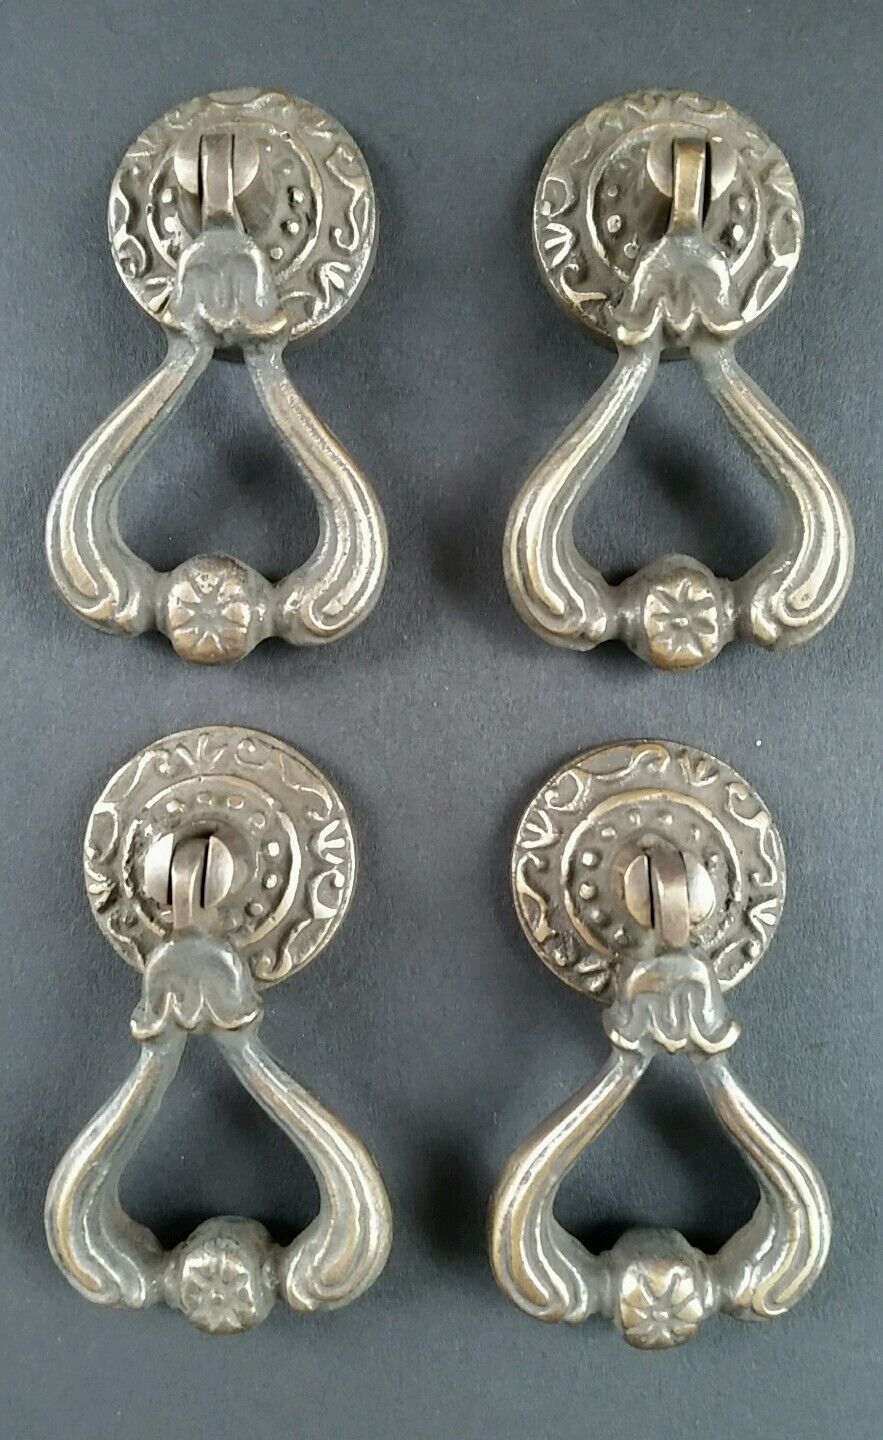 4 Ornate Brass Antique Style Handles Pulls Knob w Detailed Drop Ring 2 1/4" #H11